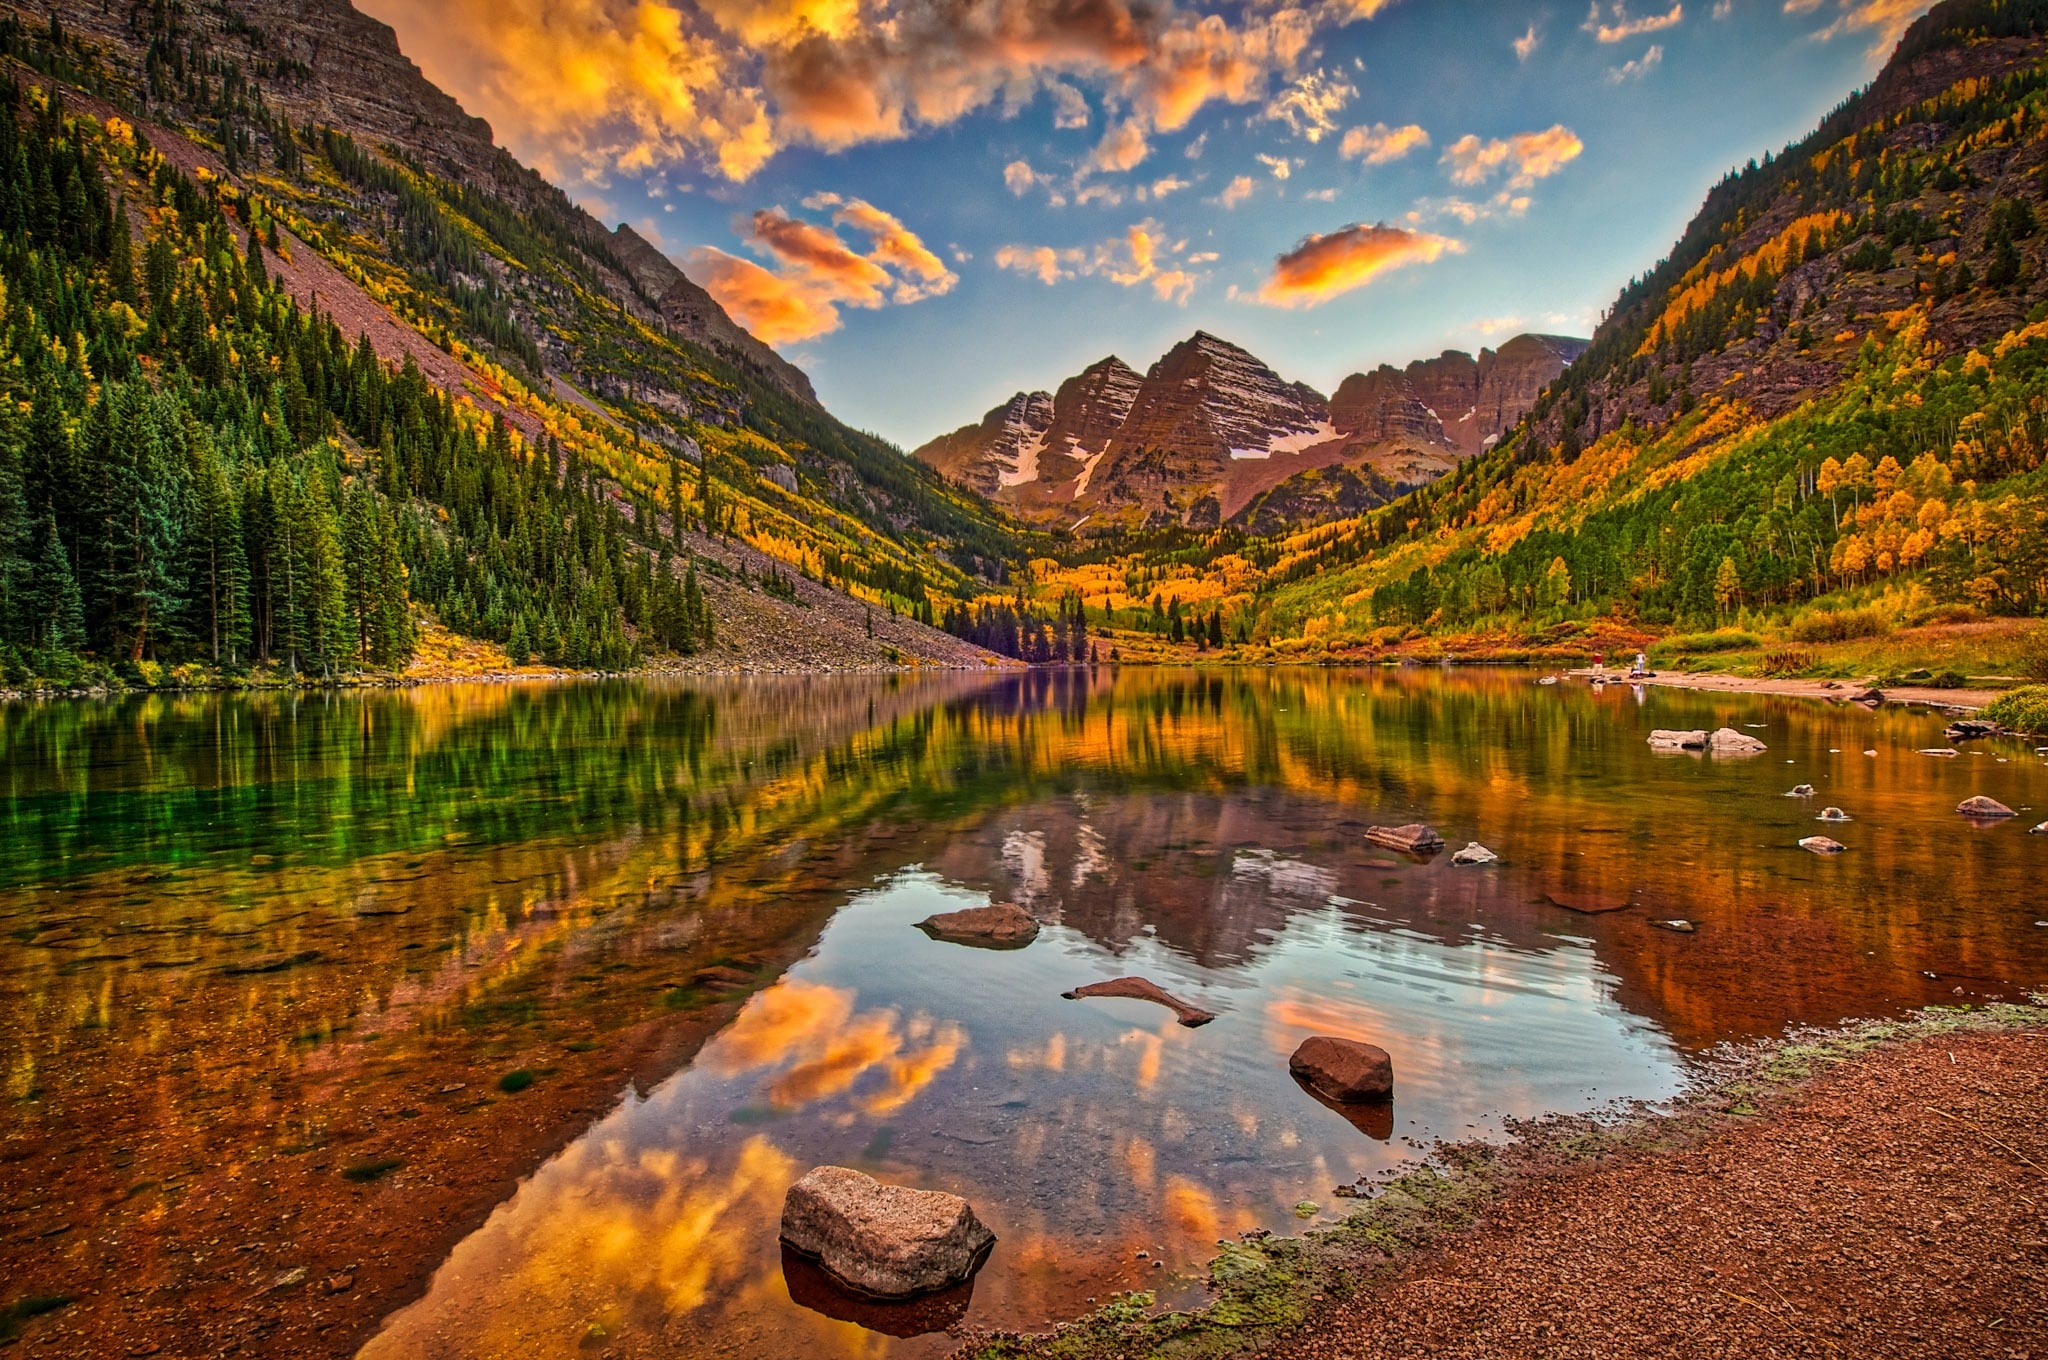 A colorful sunrise is reflected in the still waters of Maroon Lake in the Maroon Bells Recreation Arez near Aspen, Colorado.